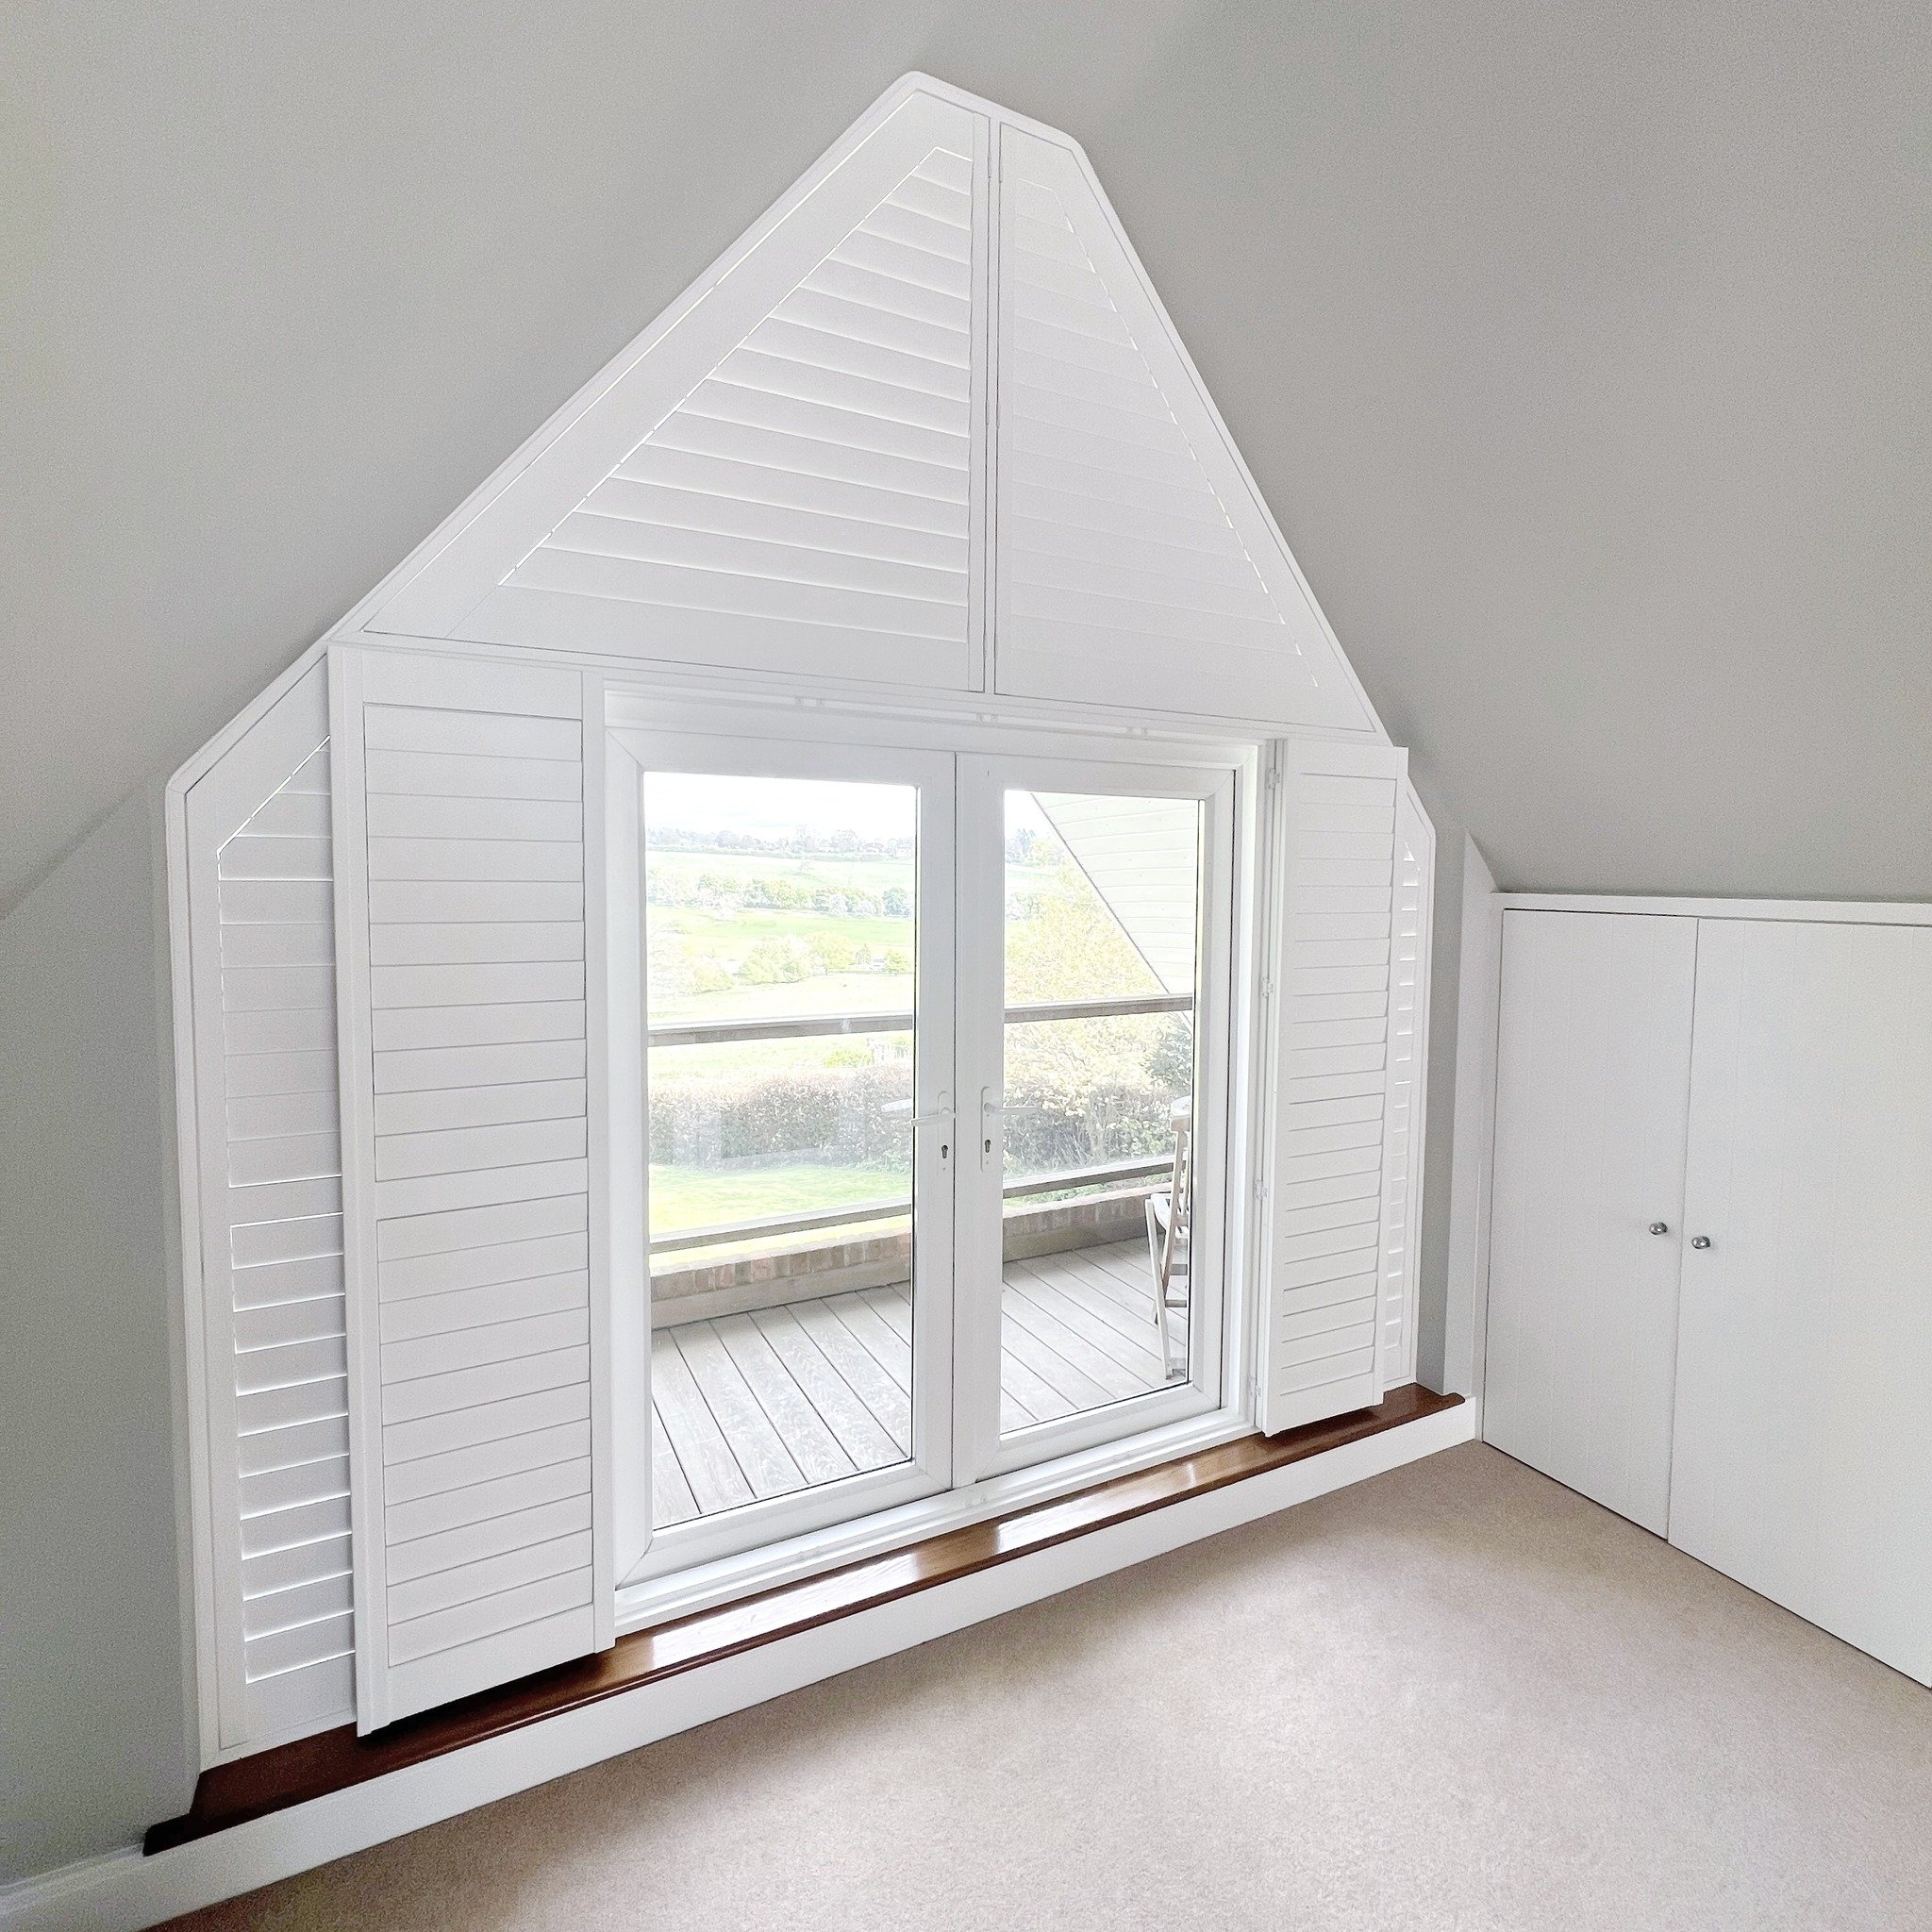 Our Full Height Shutters Aren't Just Window Dressings; They Can Be Utilized as A Link Between Indoor Comfort and Outdoor Serenity. With Full Open Door Access to The Customer's Decking, They Offer Safety, Privacy, and Natural Light Control. 

Plus, We